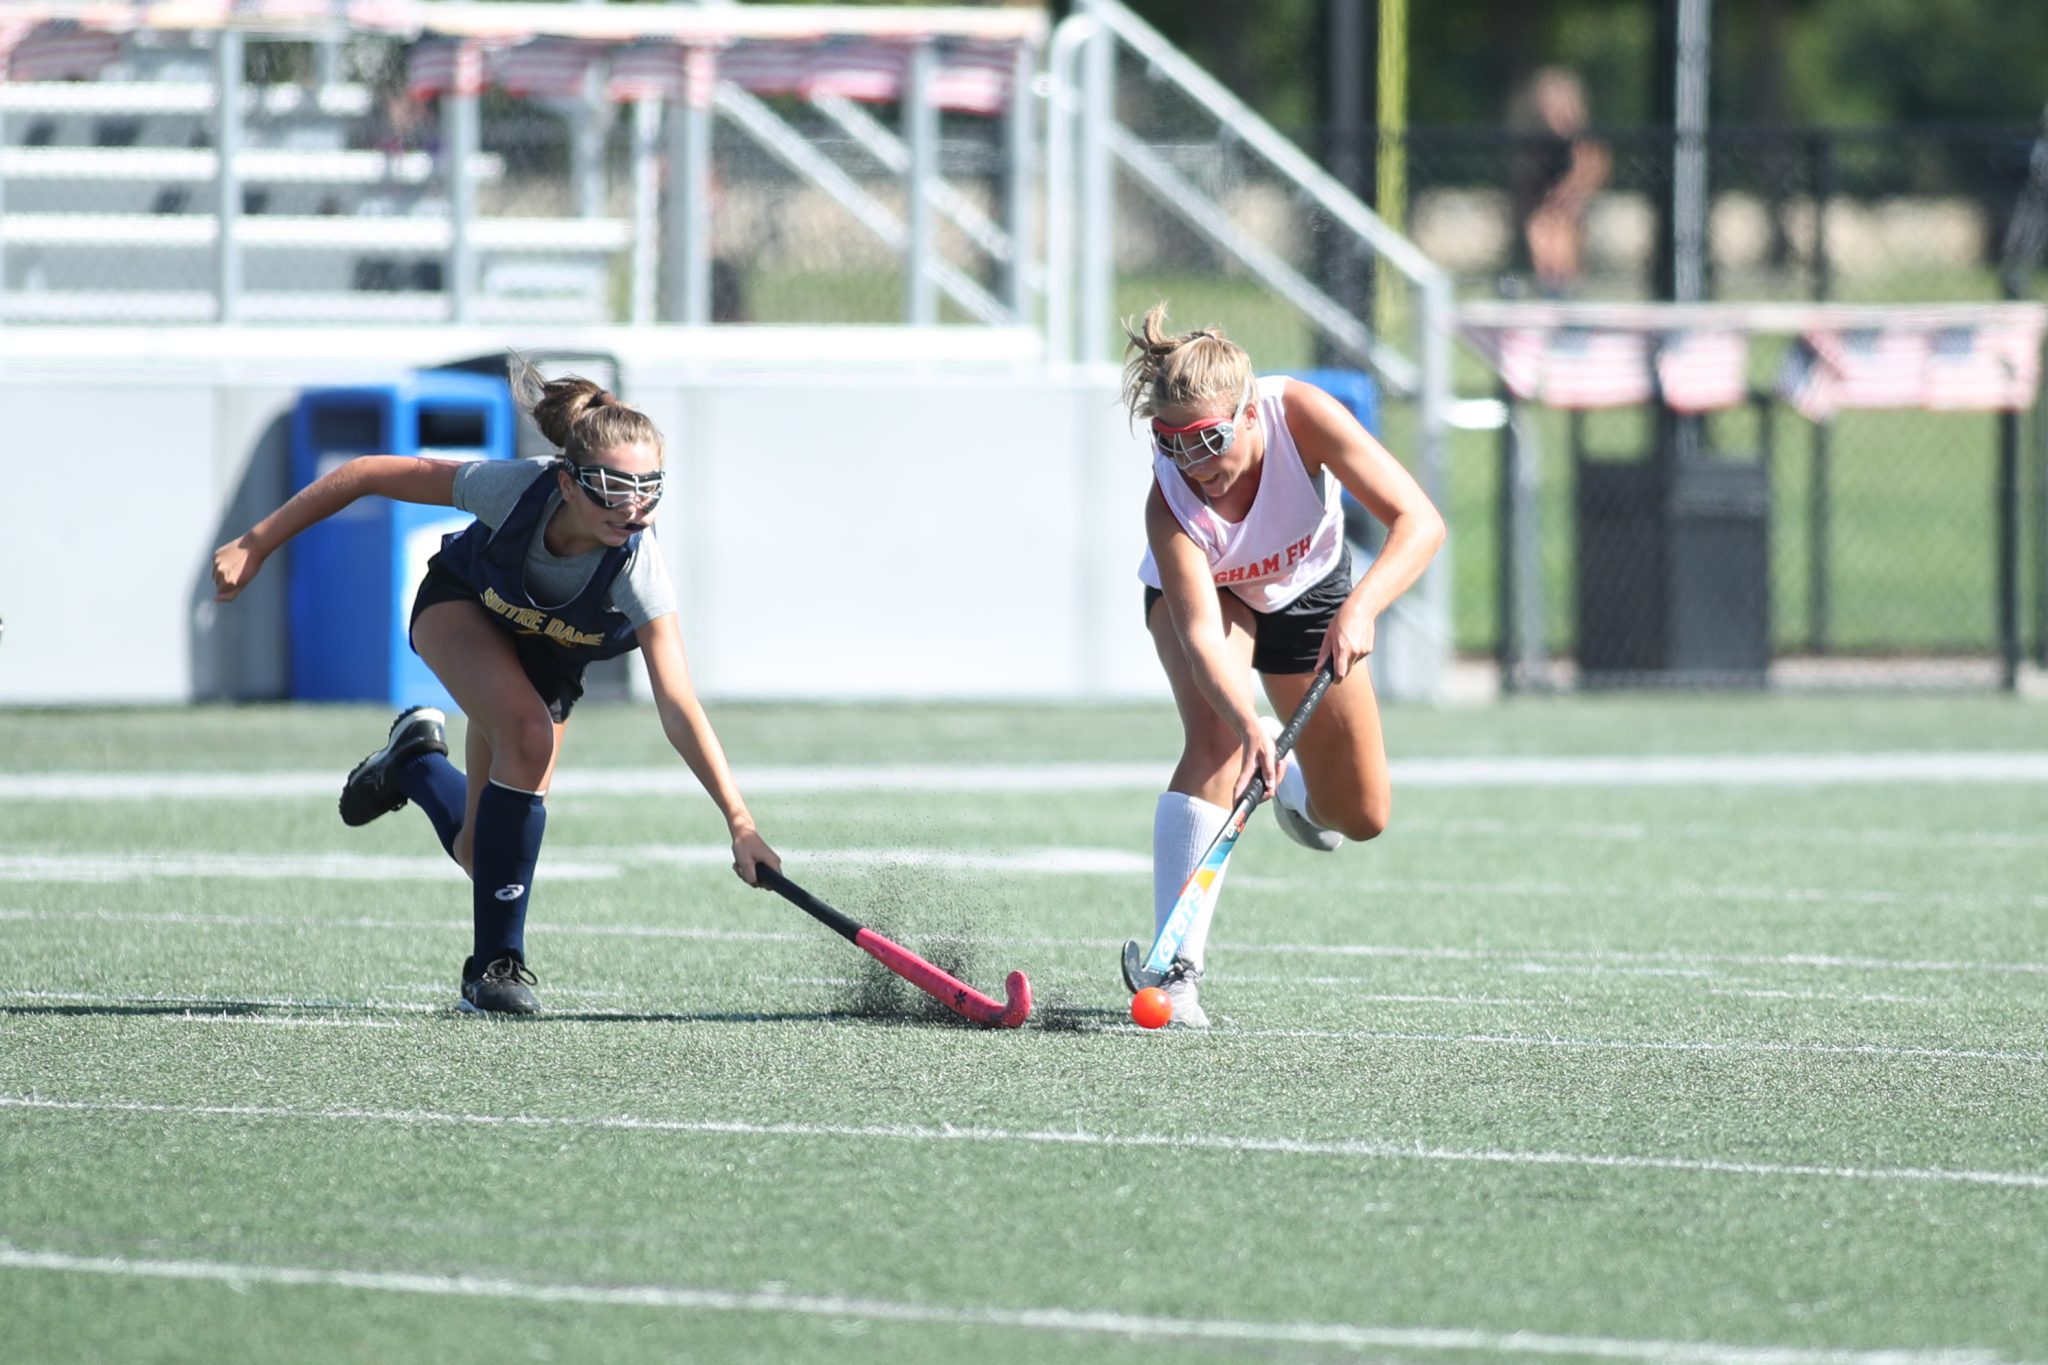 Senior captain Abbey Kennedy moves the ball during a scrimmage with Notre Dame earlier this week.